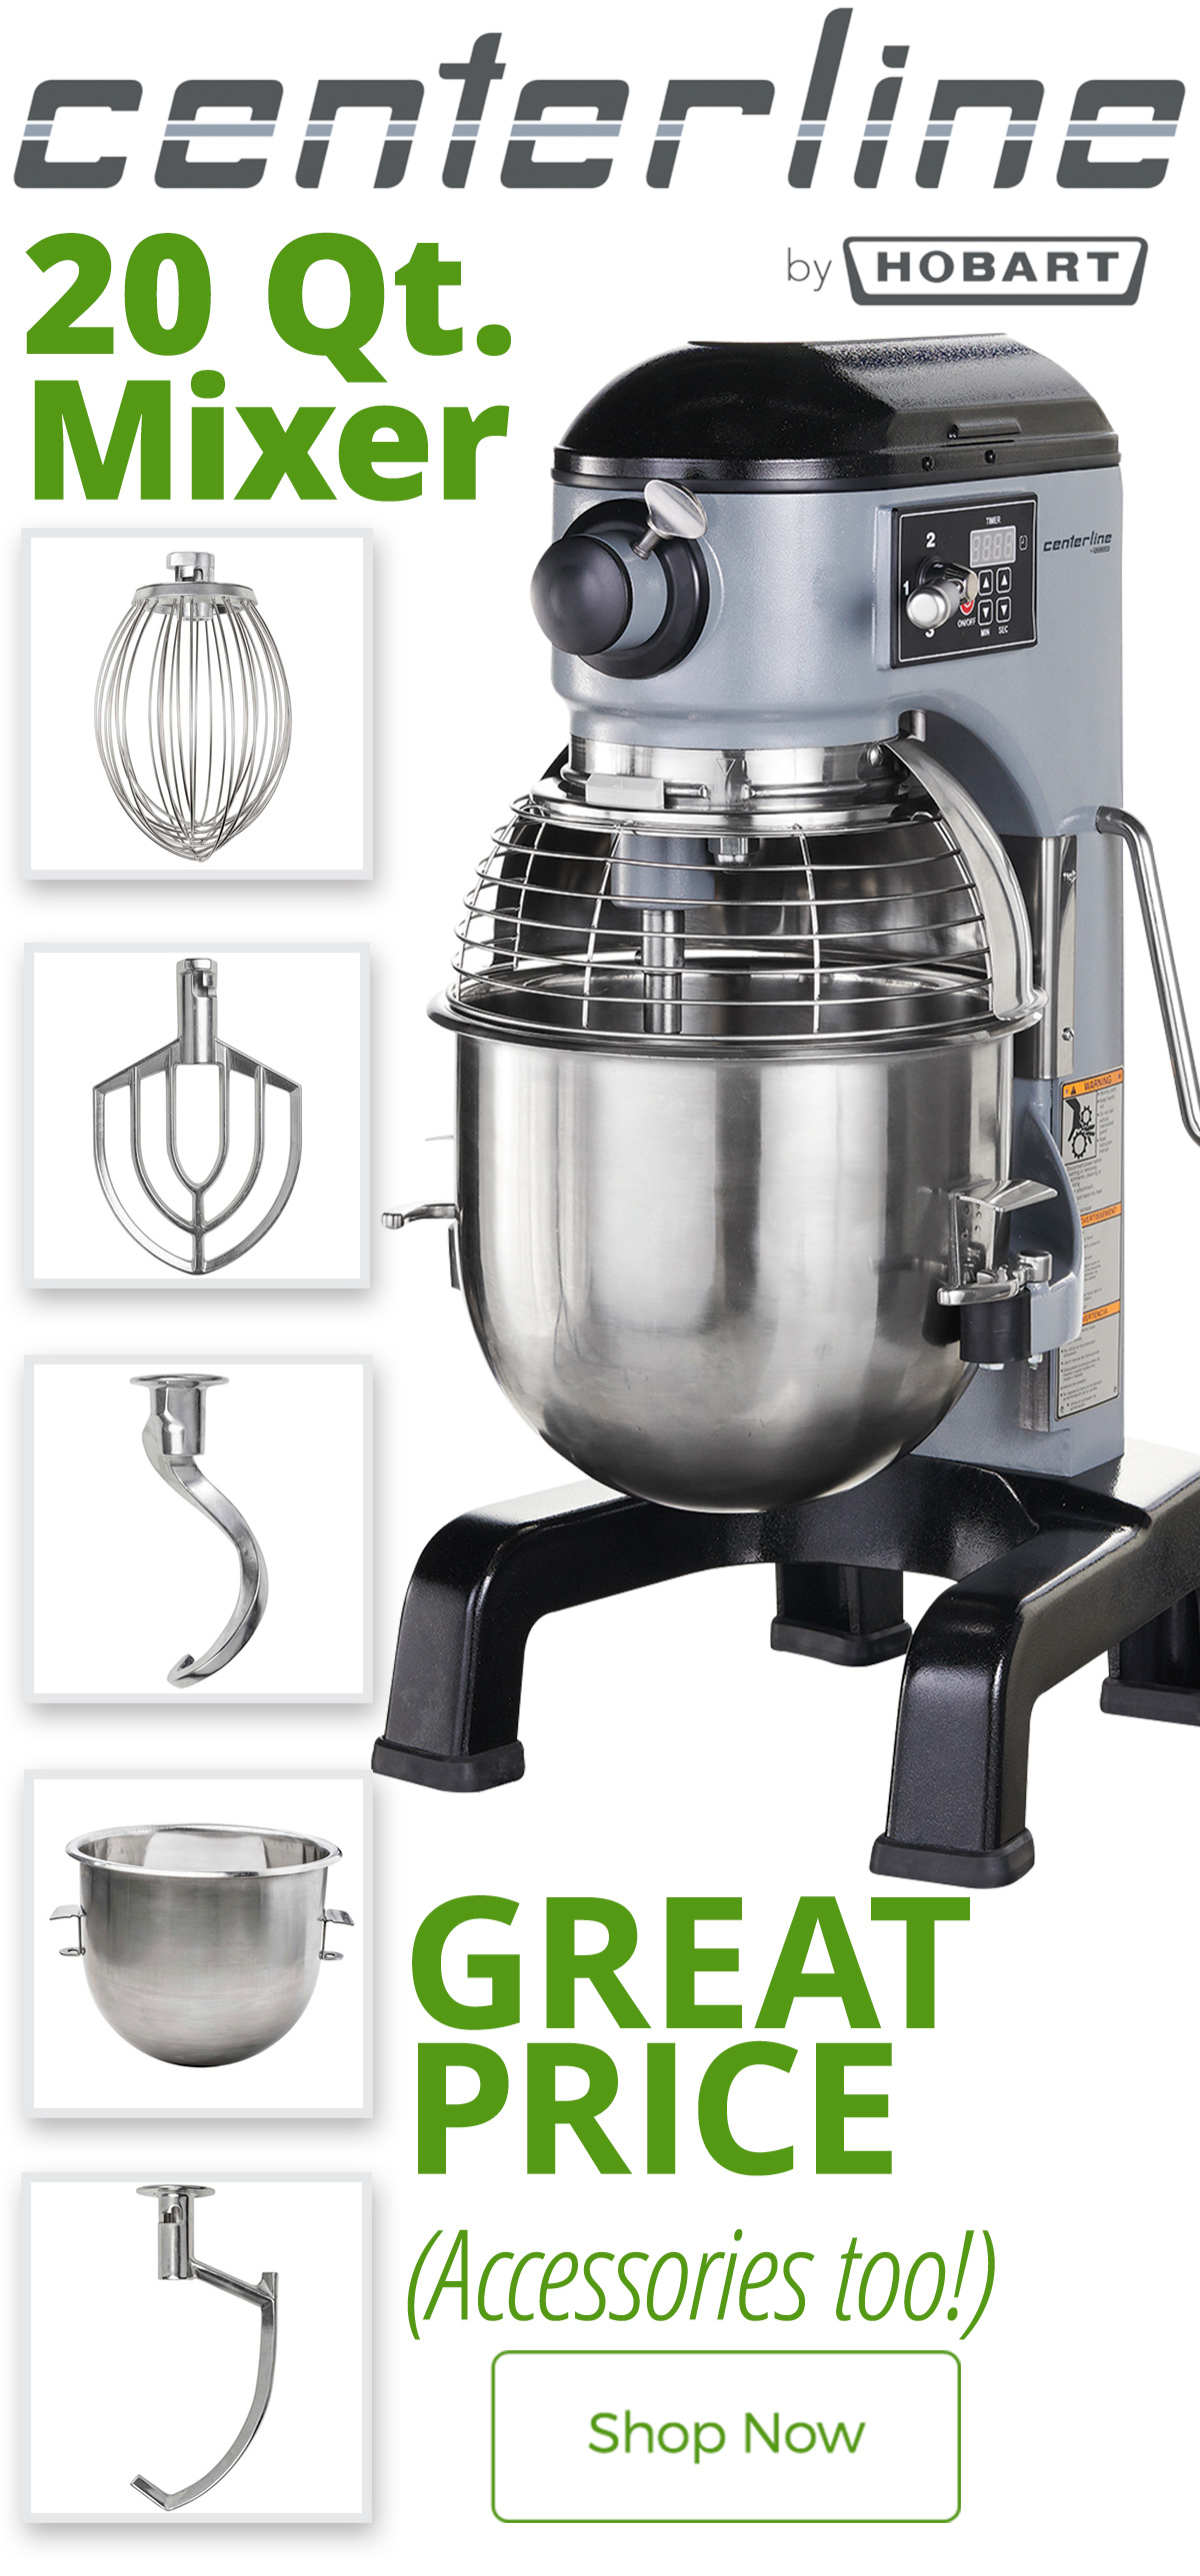 Hobart 20 Qt. Mixer now at an unbelievably great price (accessories too)!